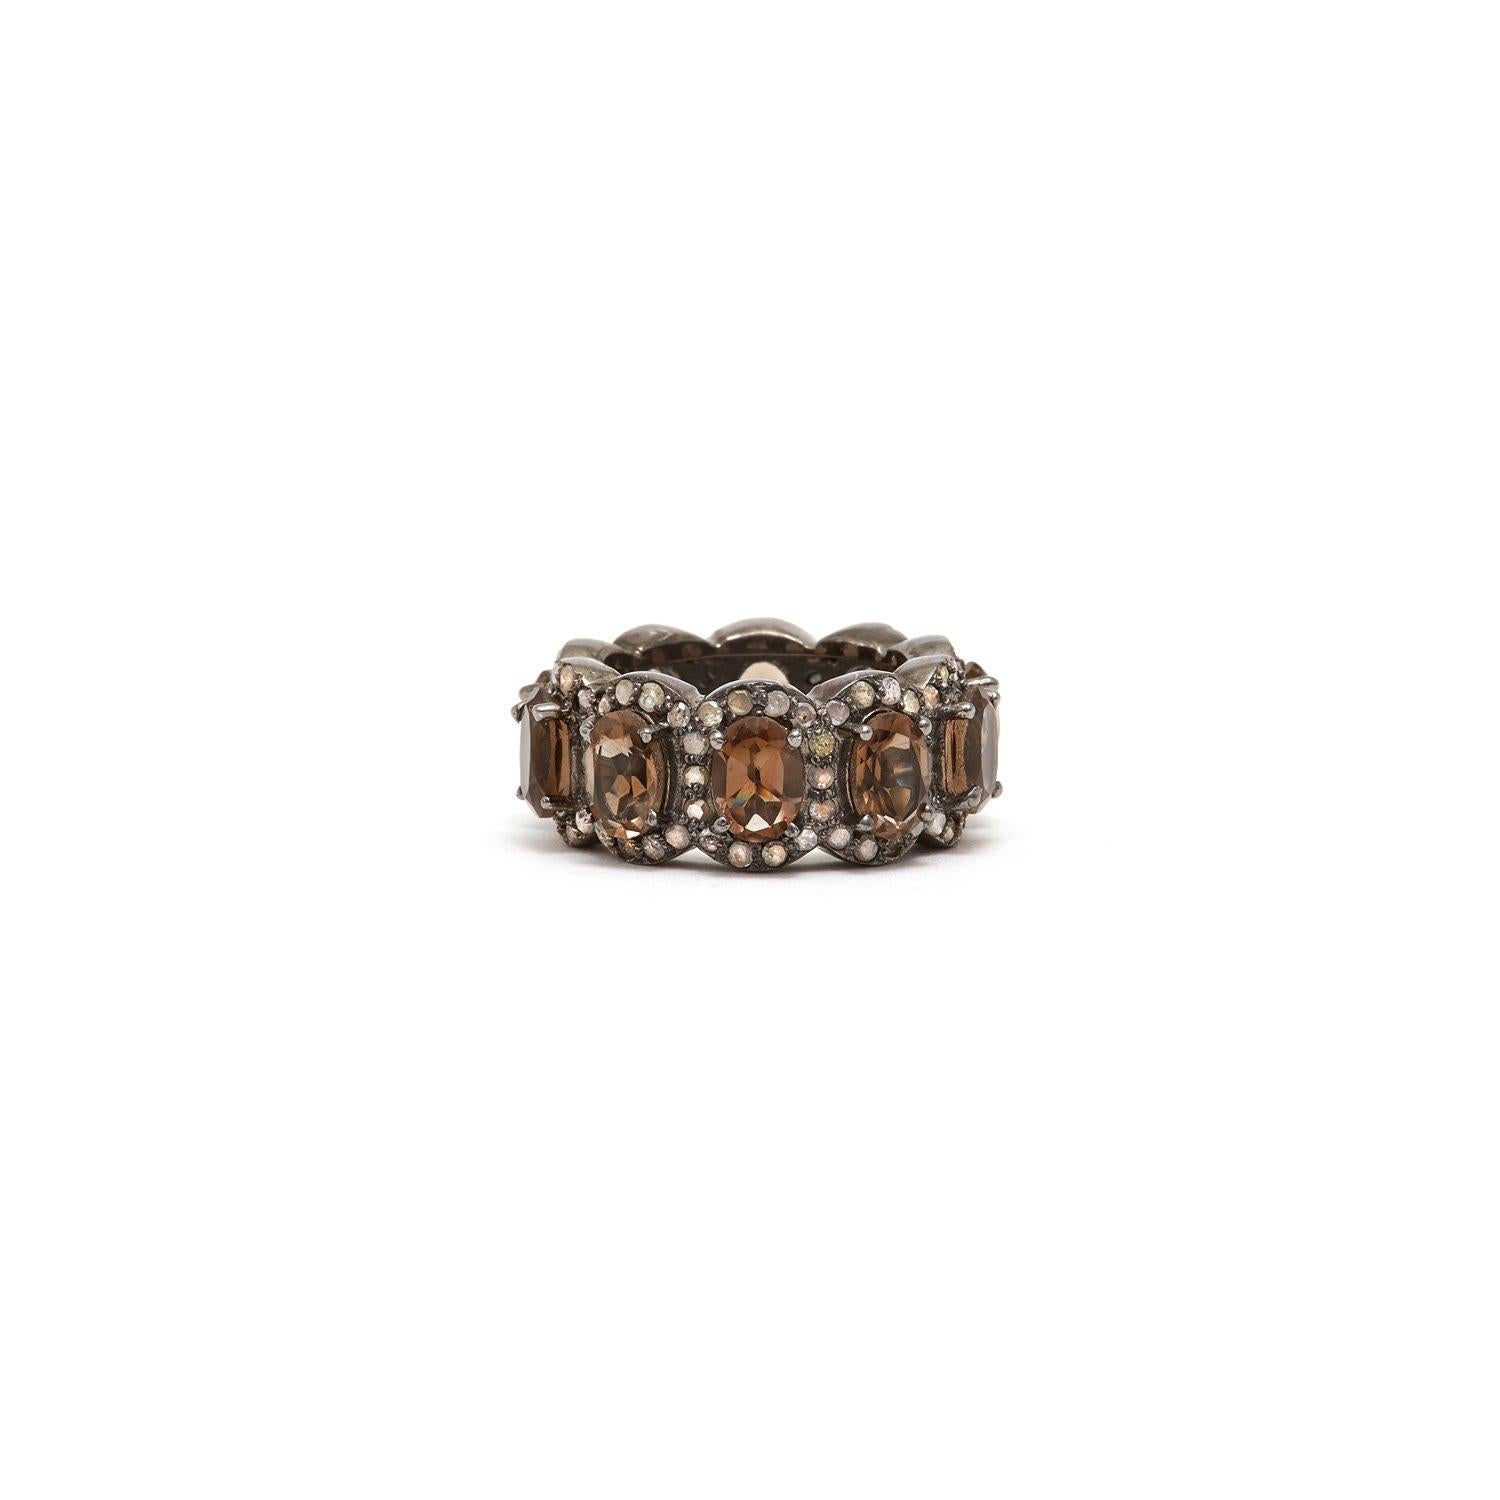 Chocolate smokey Quartz baguettes accented with white Diamonds in a blackened silver band reminiscent of an Art Deco Tiara.

- Natural Chocolate Smokey Quartz.
- Natural Diamonds.
- Set in Blackened Oxidized Silver.